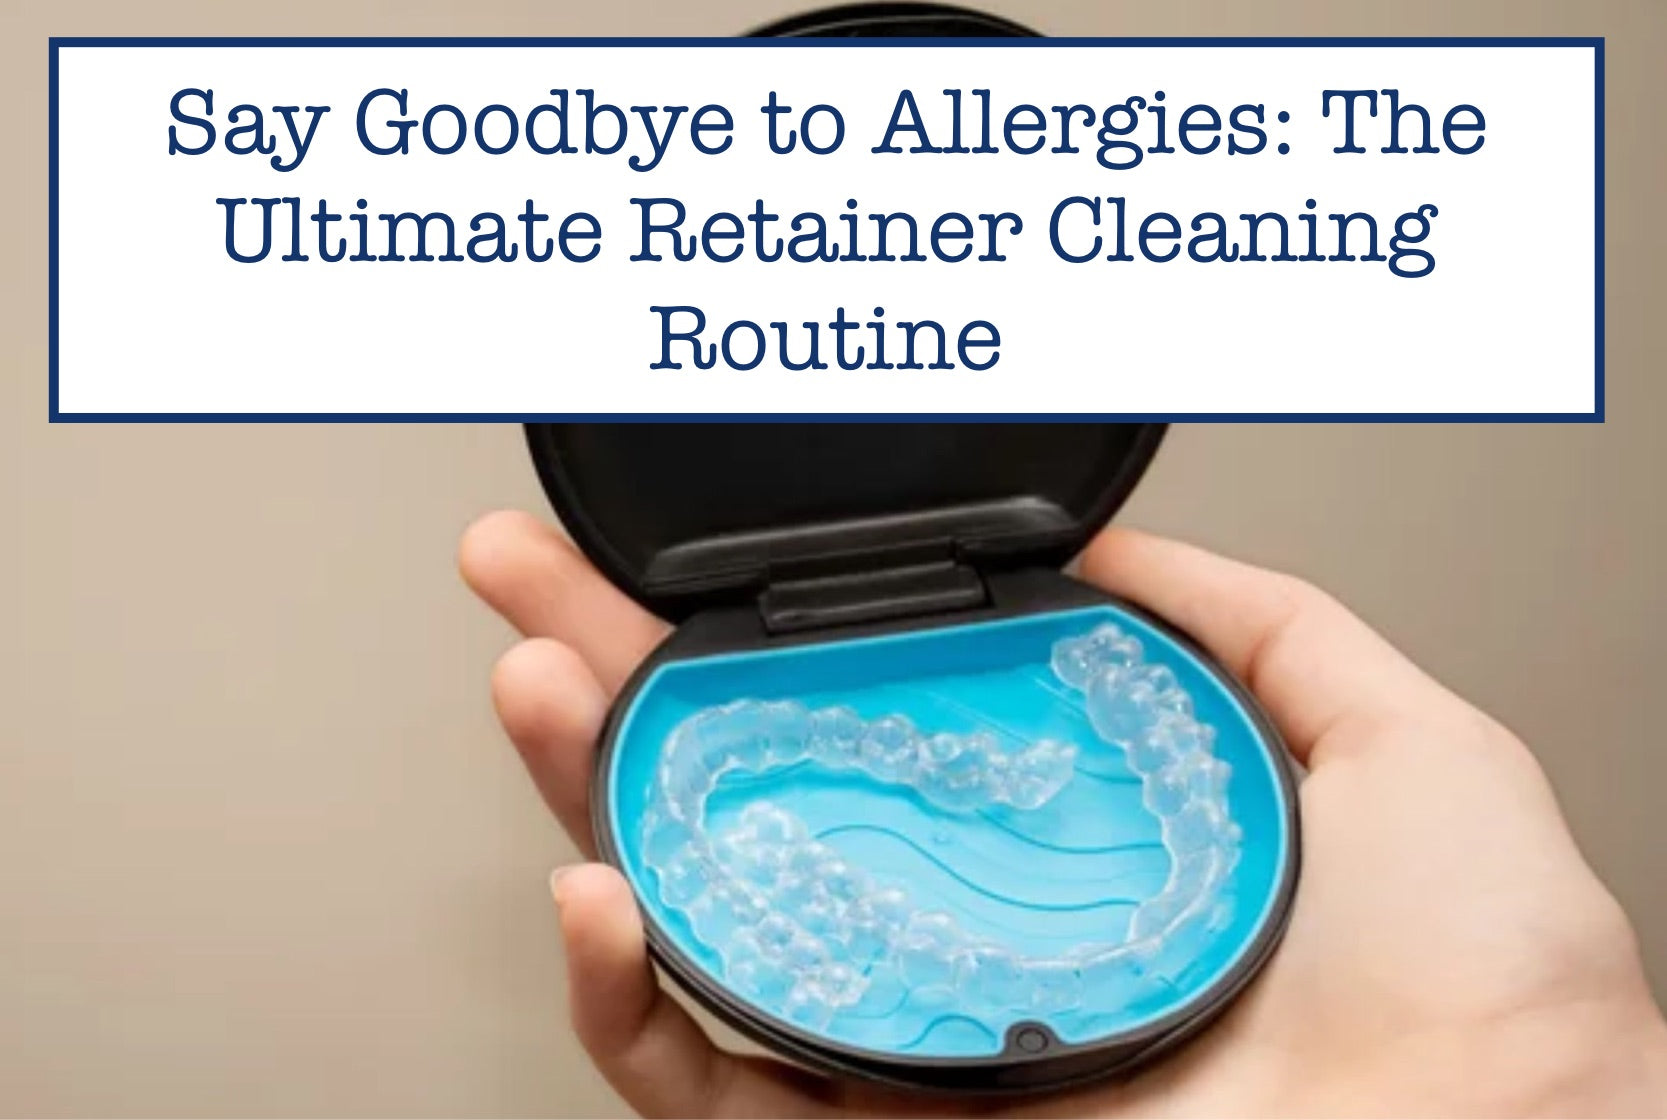 Say Goodbye to Allergies: The Ultimate Retainer Cleaning Routine